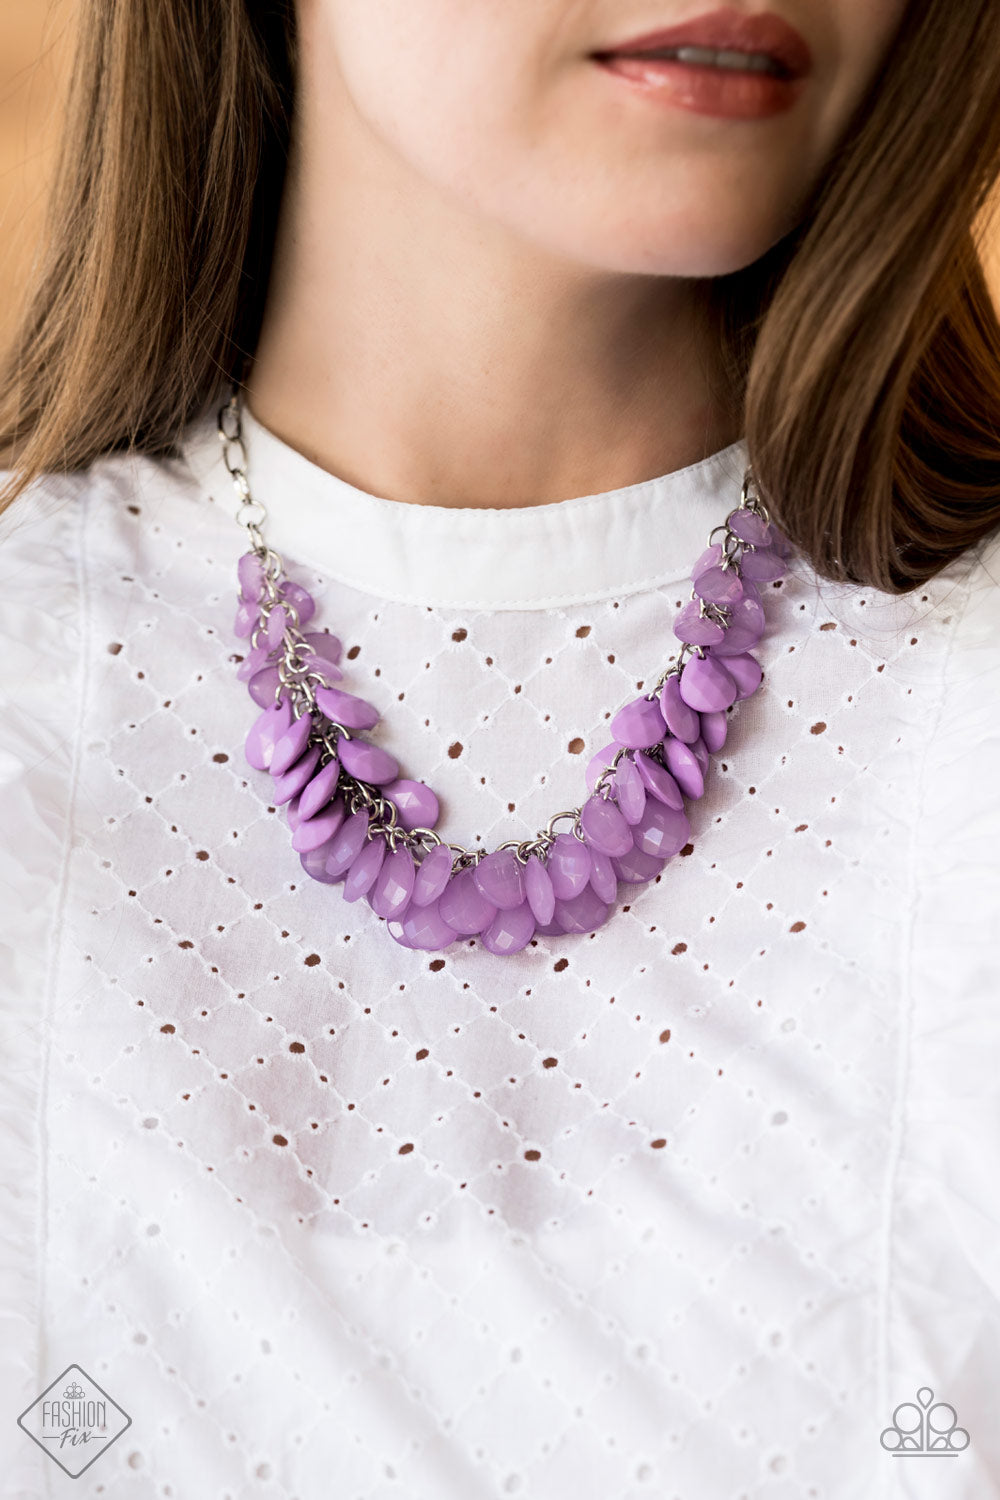 Colorfully Clustered & Go With The FLORALS - Purple Necklace & Bracelet Set 1191S